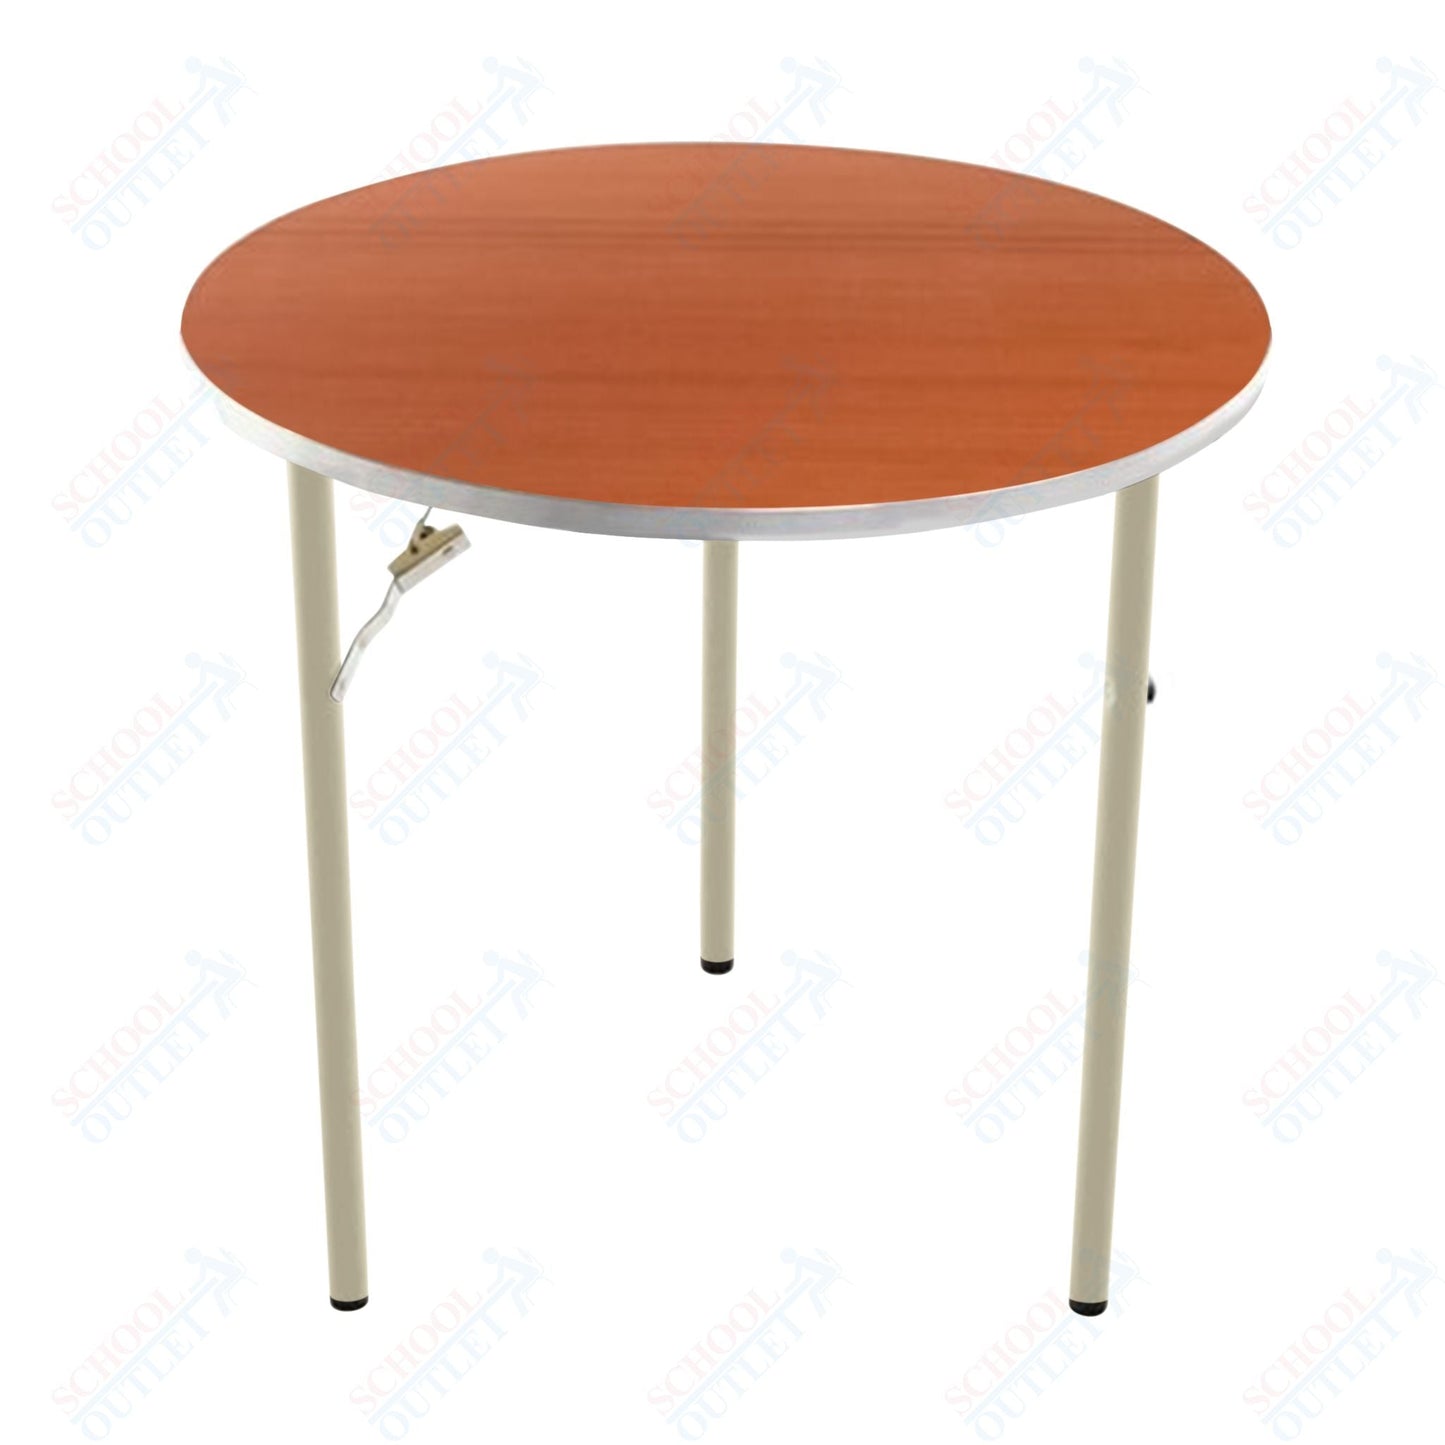 AmTab Folding Table - Plywood Stained and Sealed - Aluminum Edge - Round - 48" Diameter x 29"H (AmTab AMT - R48PA) - SchoolOutlet